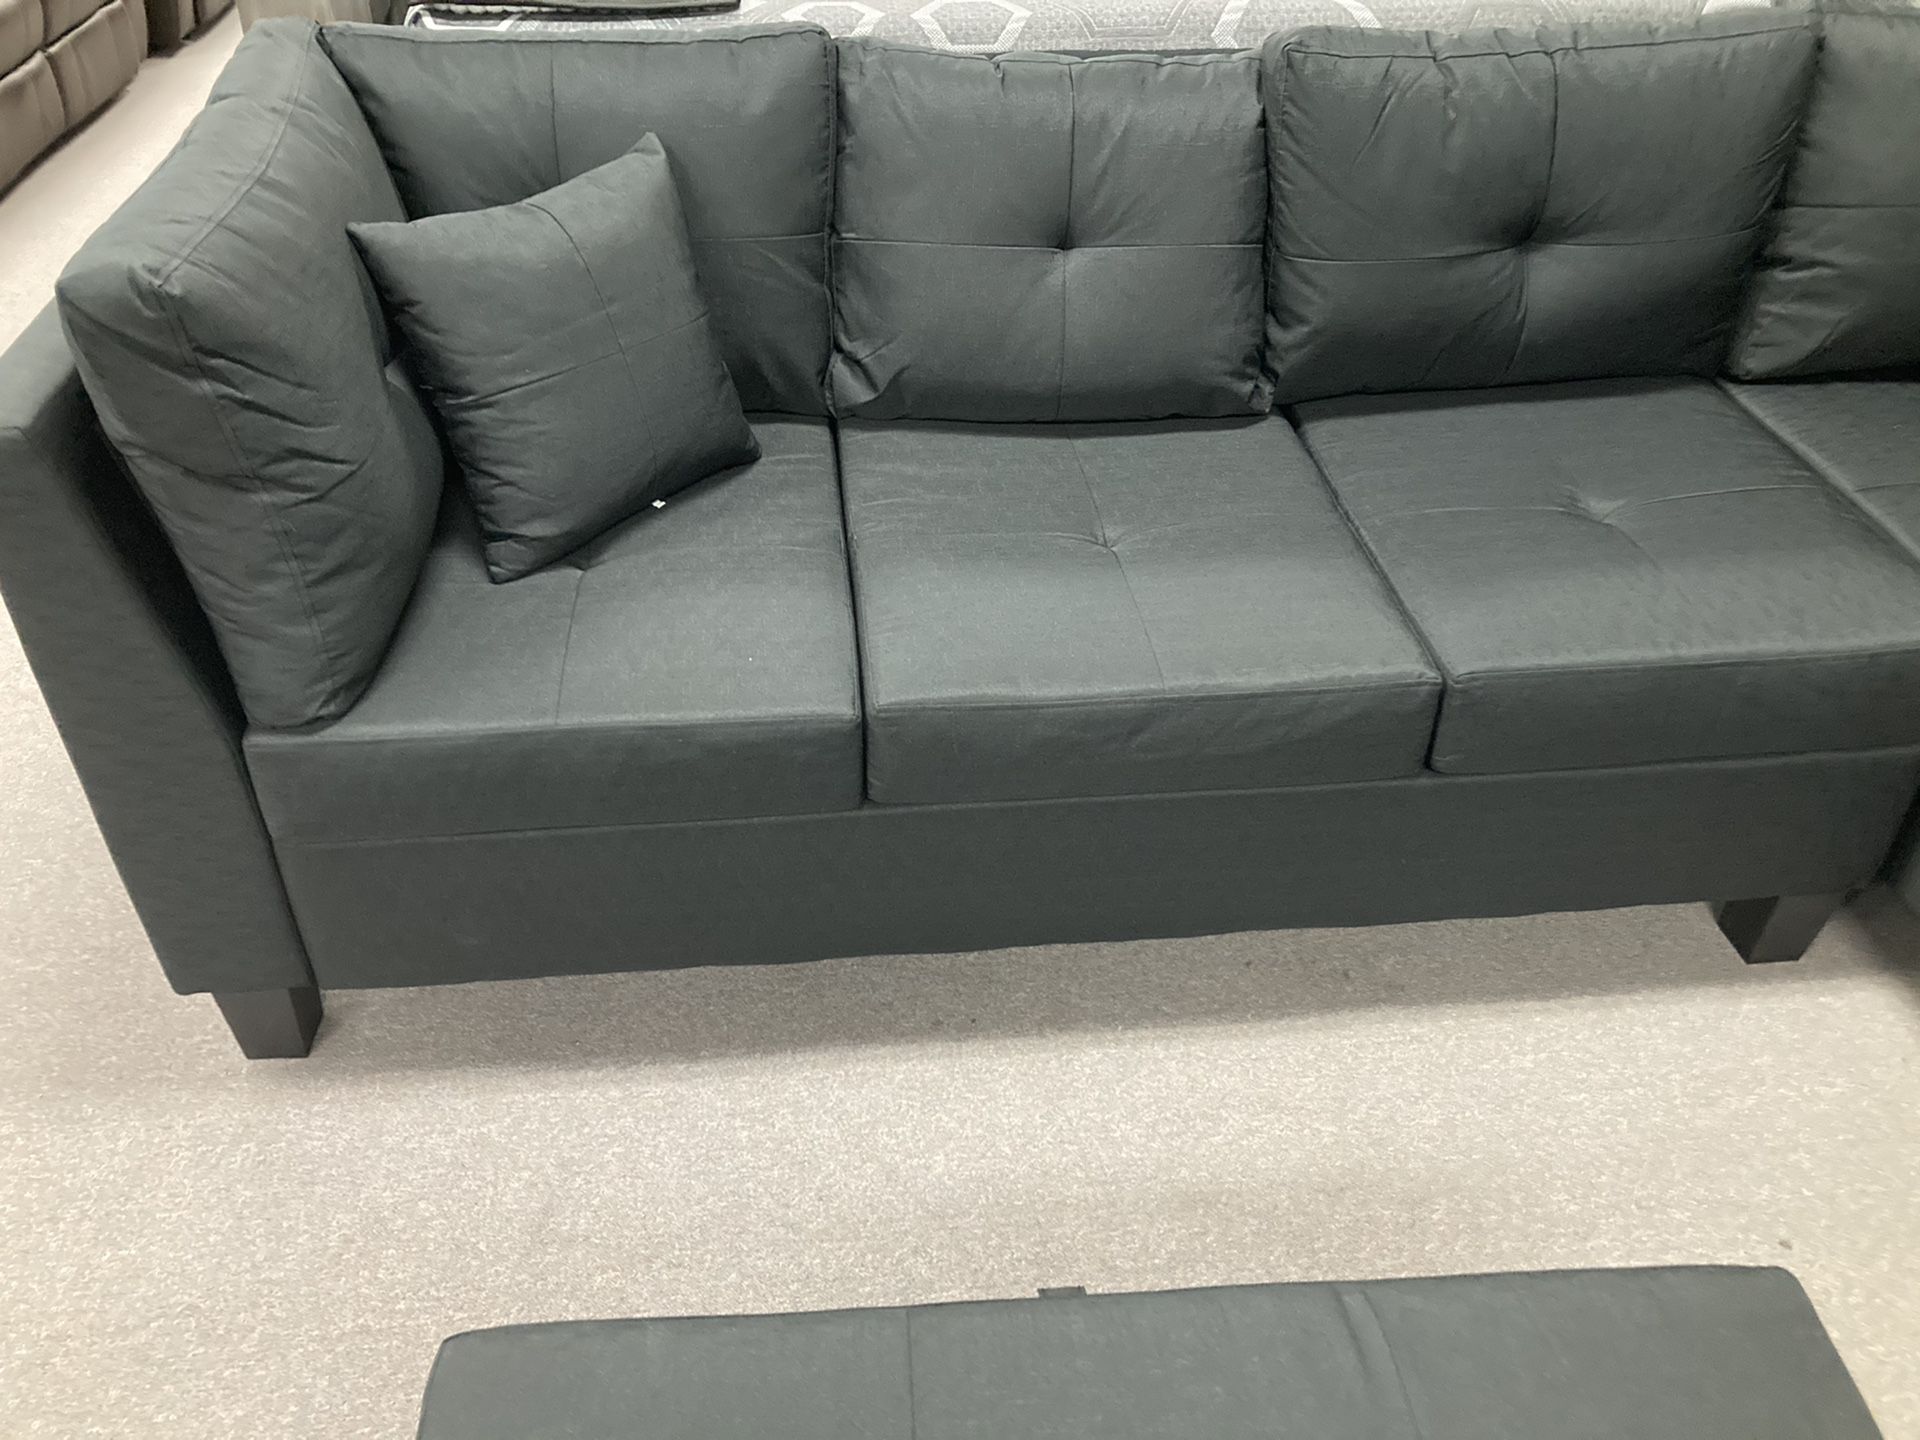 Brand New Sectional & Ottoman With Storage Space